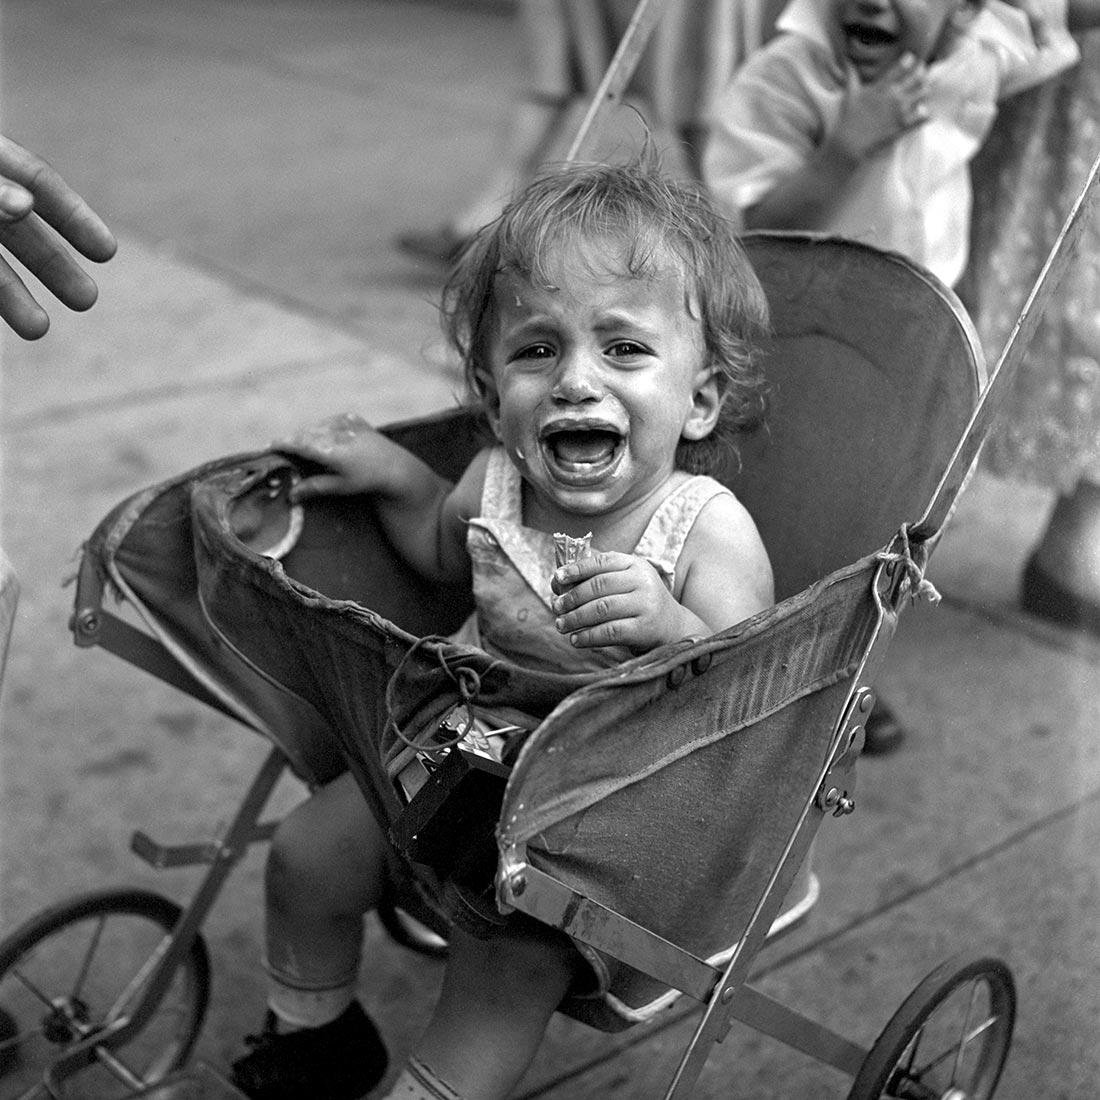 Photo of a crying child © Vivian Maier